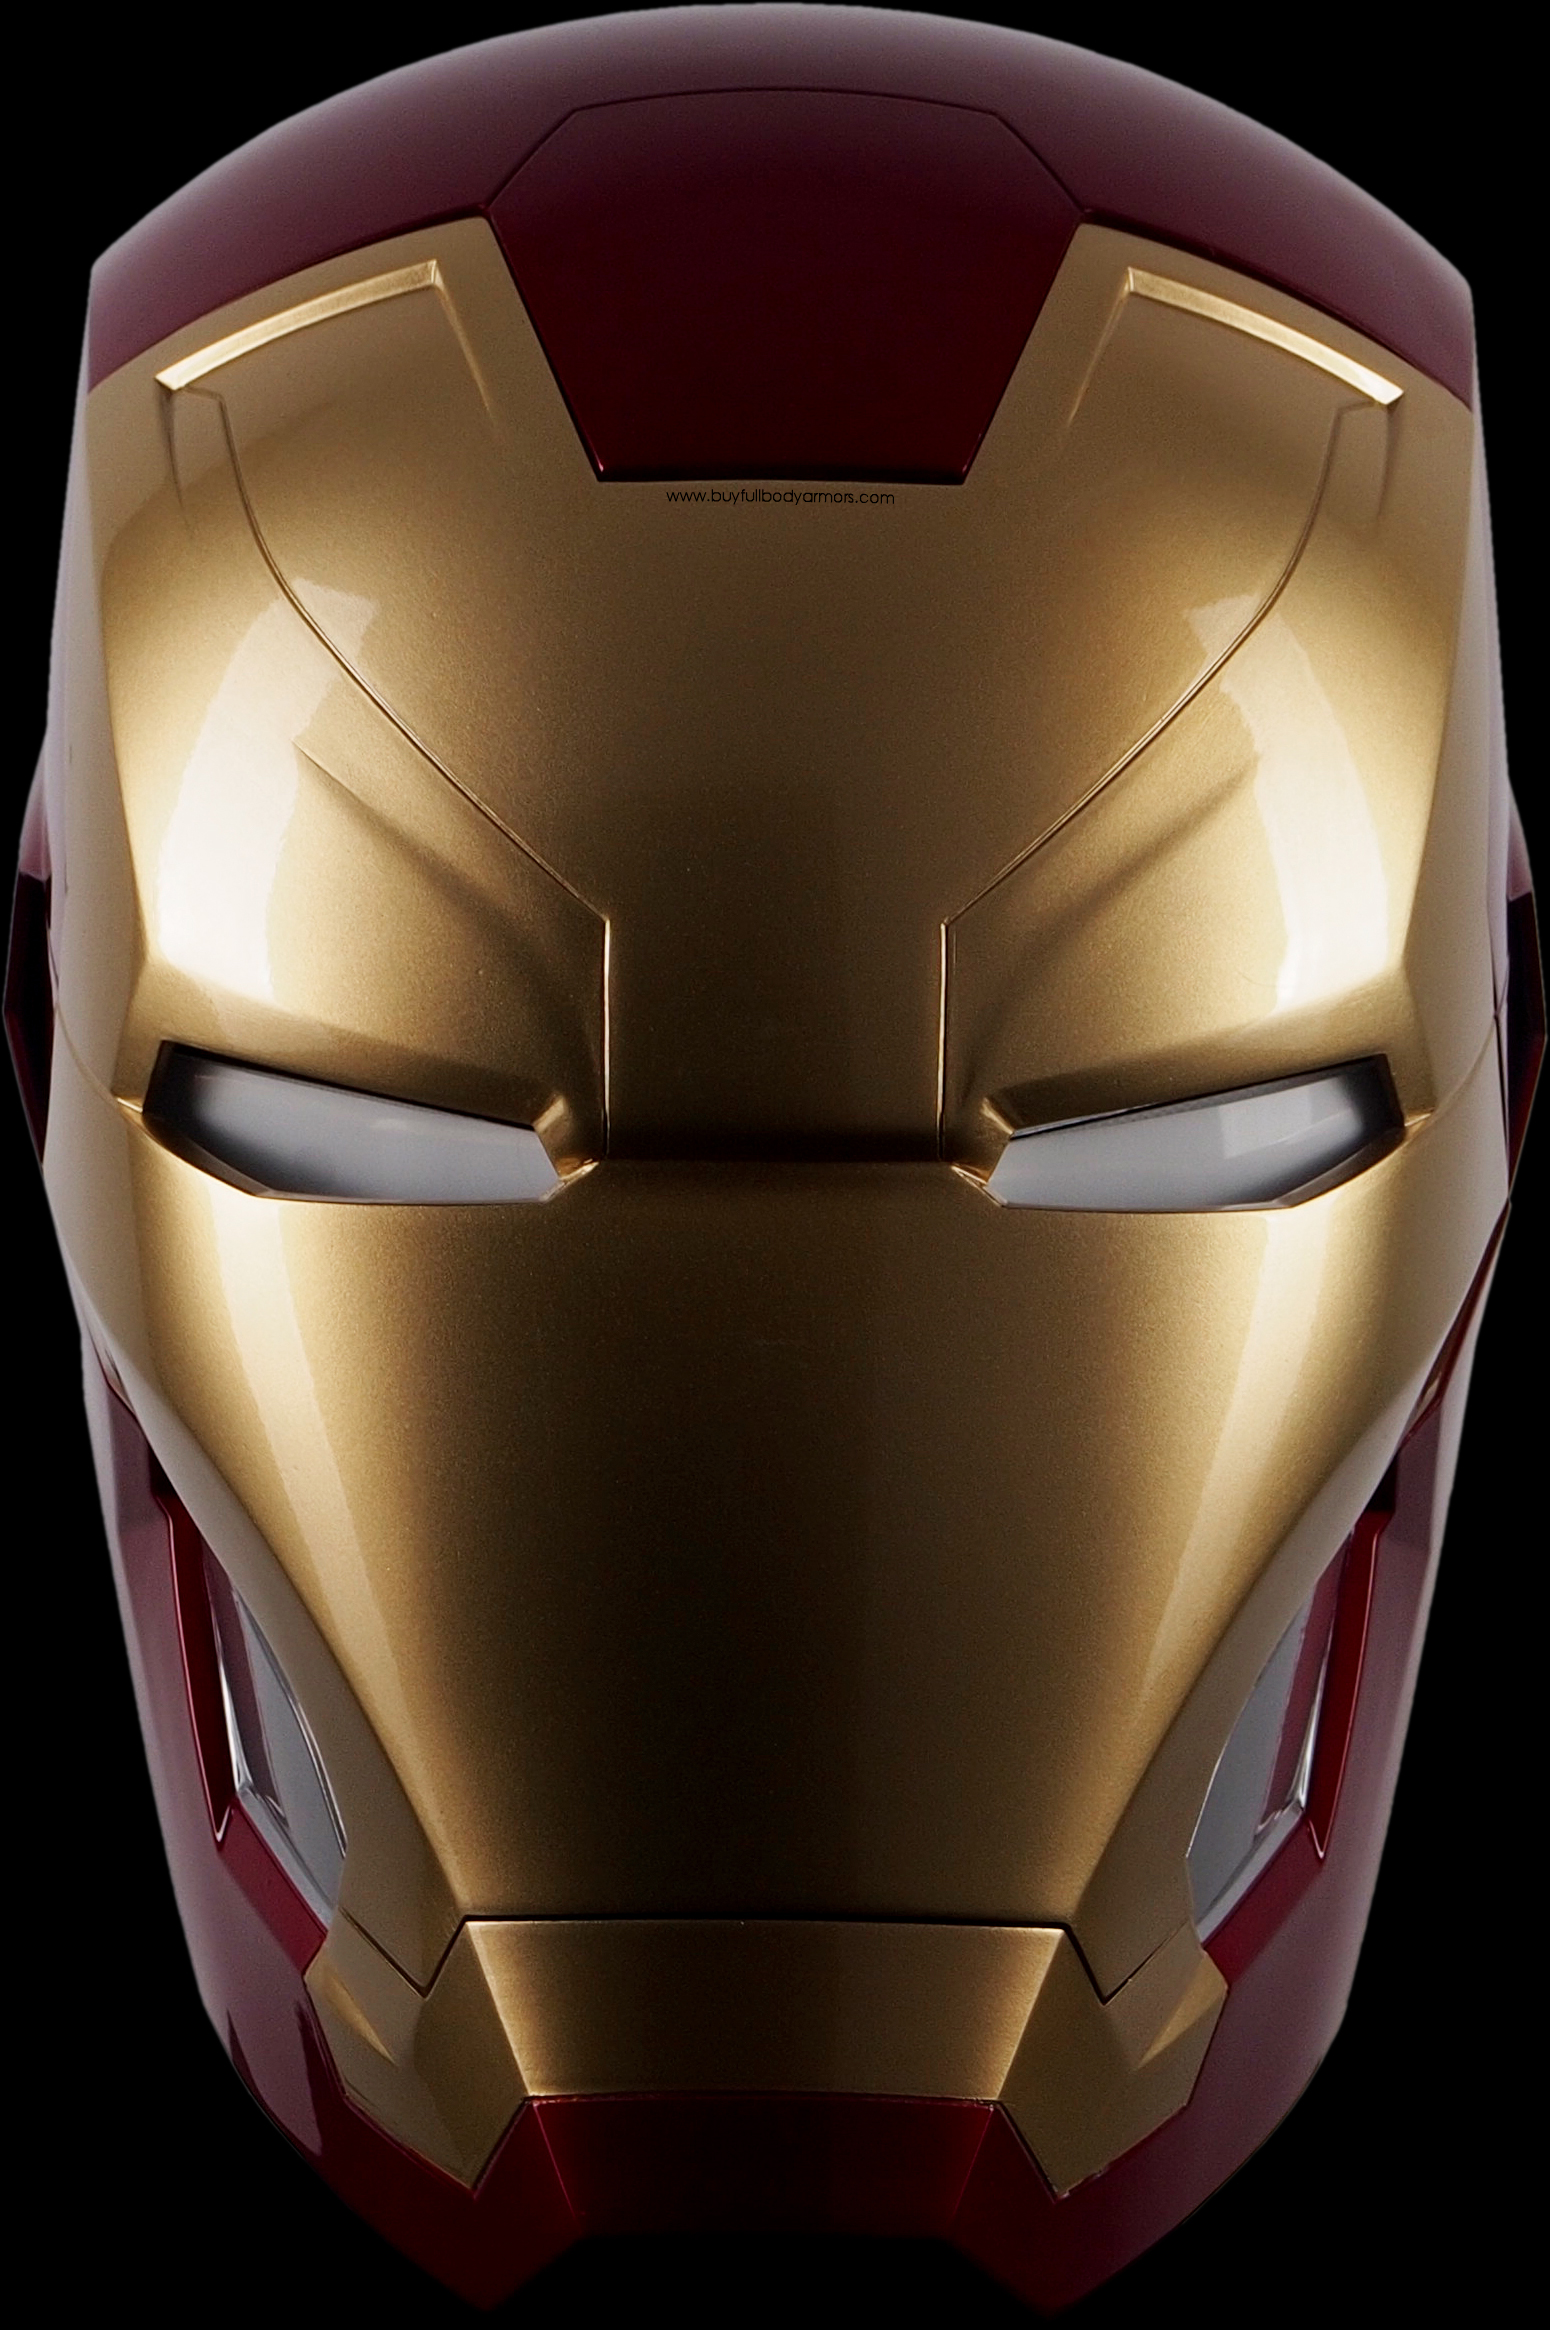 WEARABLE IRON MAN MARK 47 XLVII ARMOR COSTUME – the most anticipated